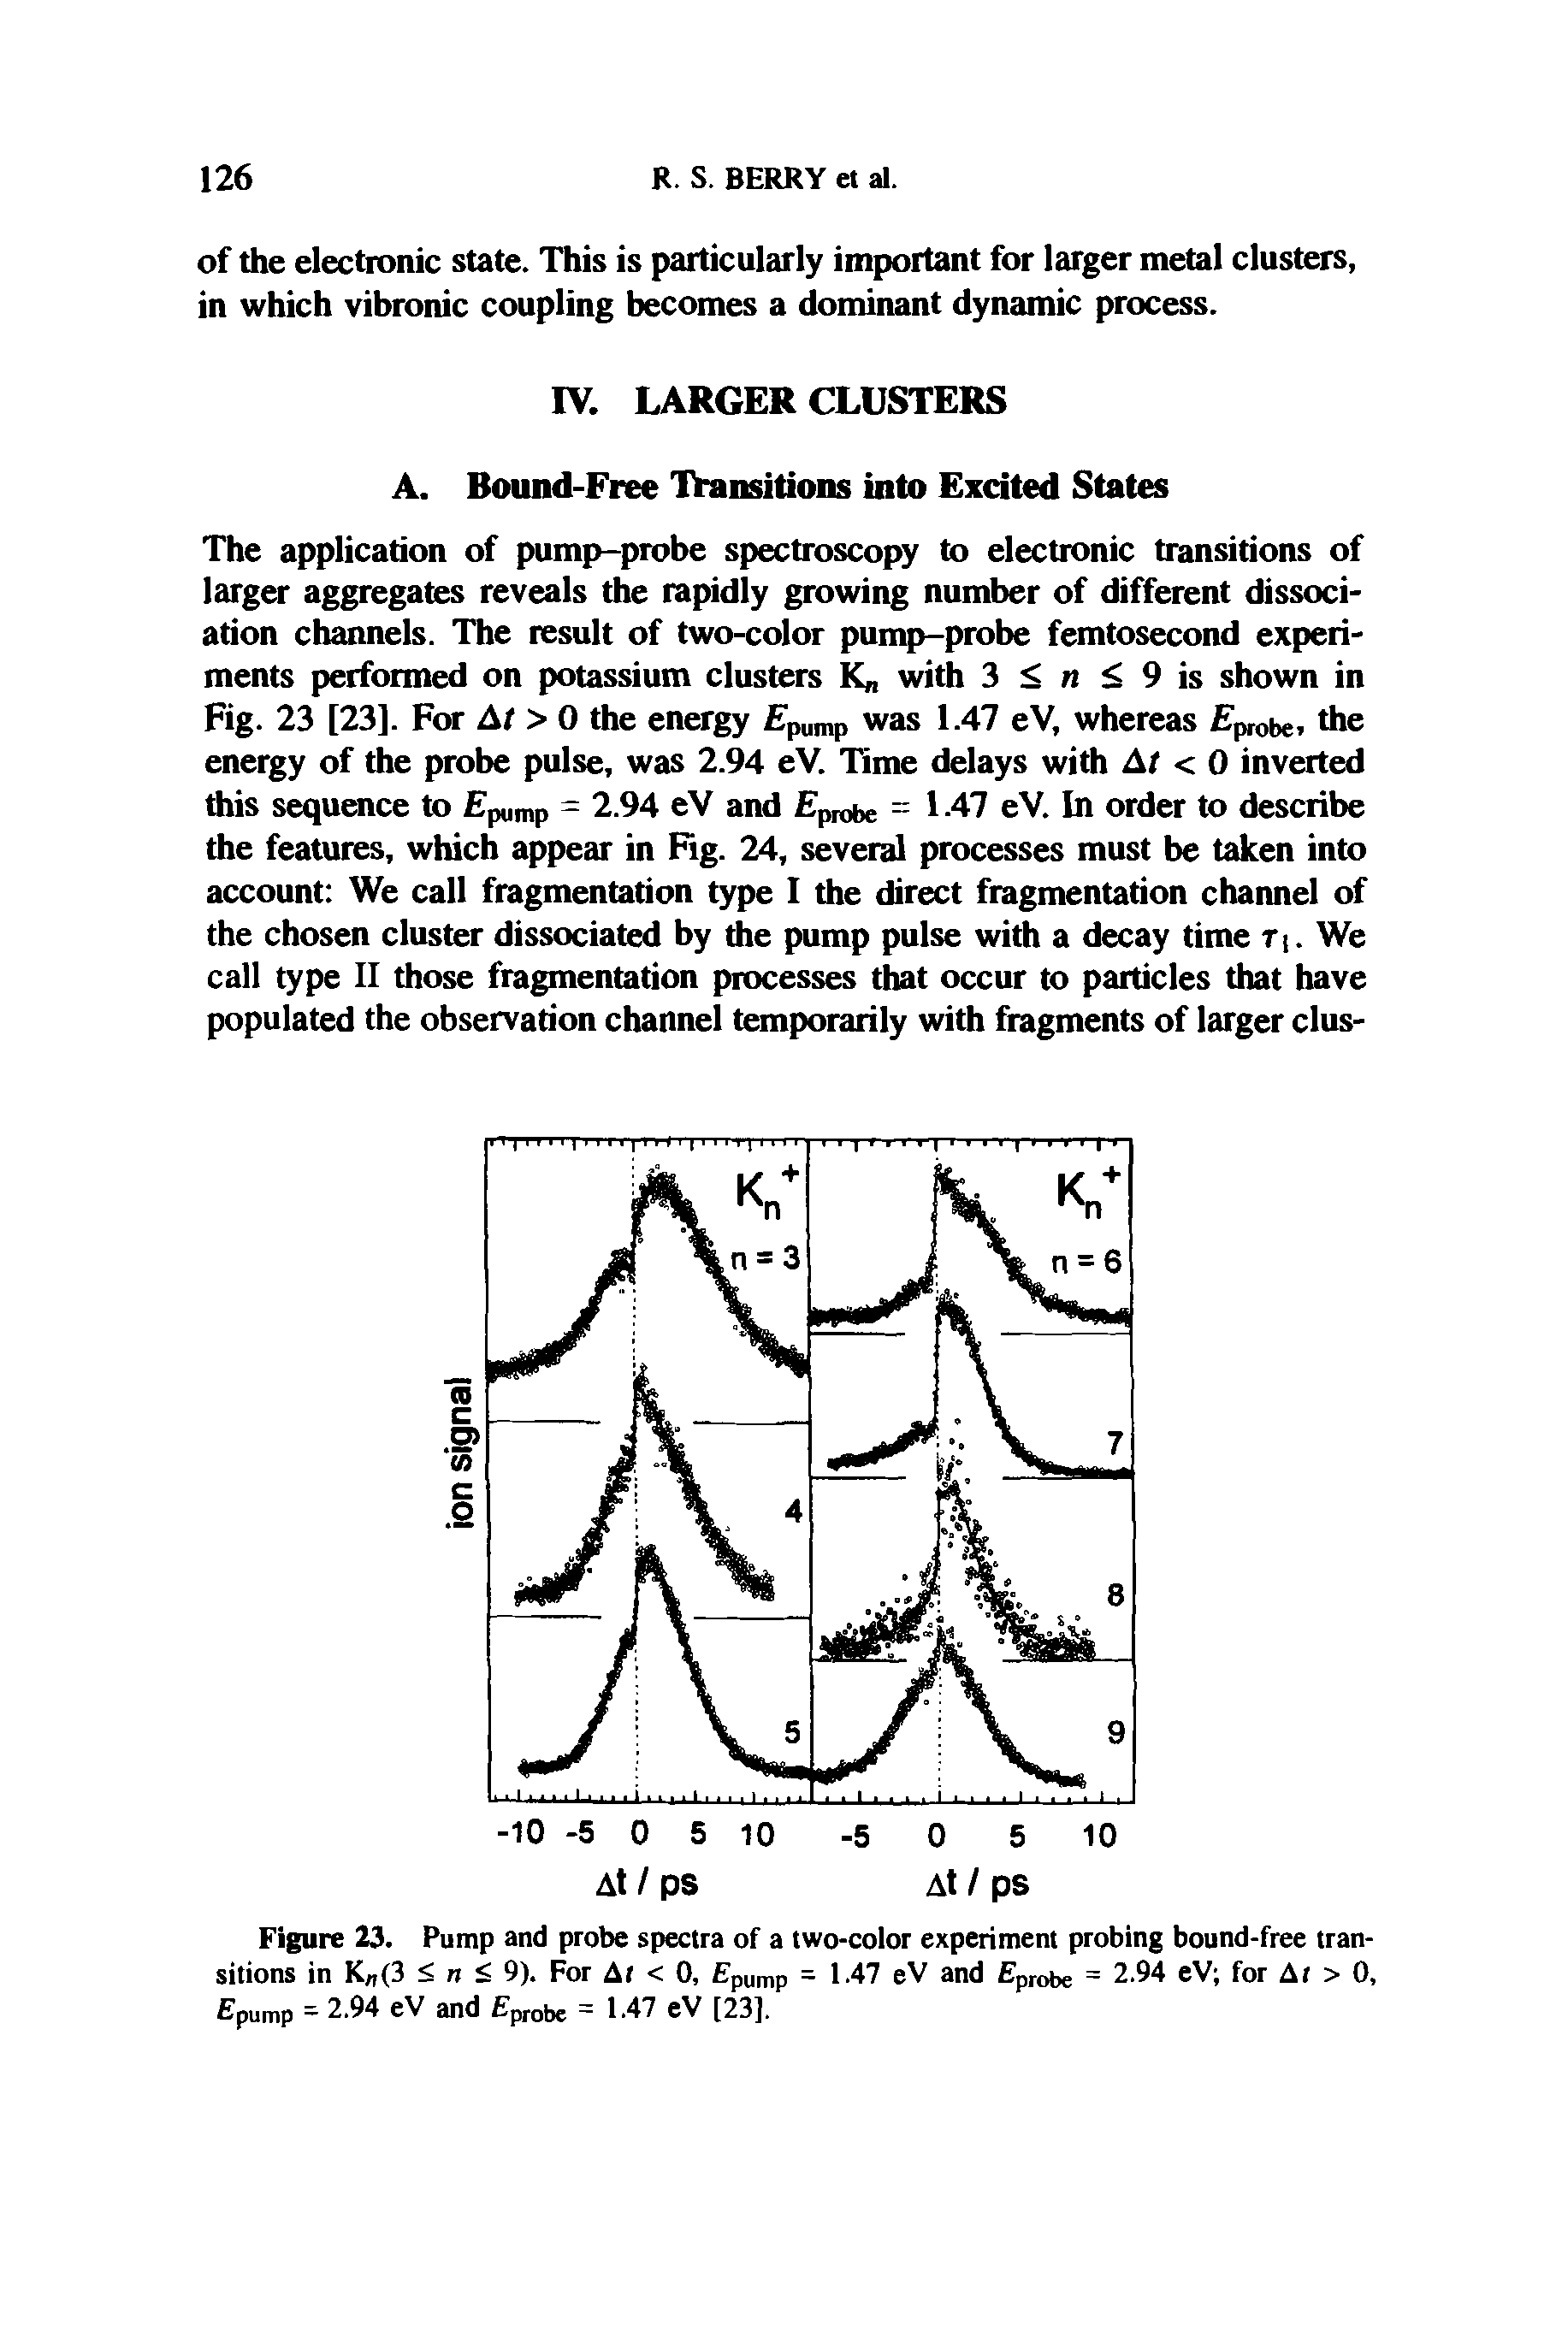 Figure 23. Pump and probe spectra of a two-color experiment probing bound-free transitions in K (3 < n < 9). For At < 0, Epump = 1.47 eV and Eprobe = 2.94 eV for At > 0, Epump — 2.94 eV and Eprobe = 1.47 eV [23],...